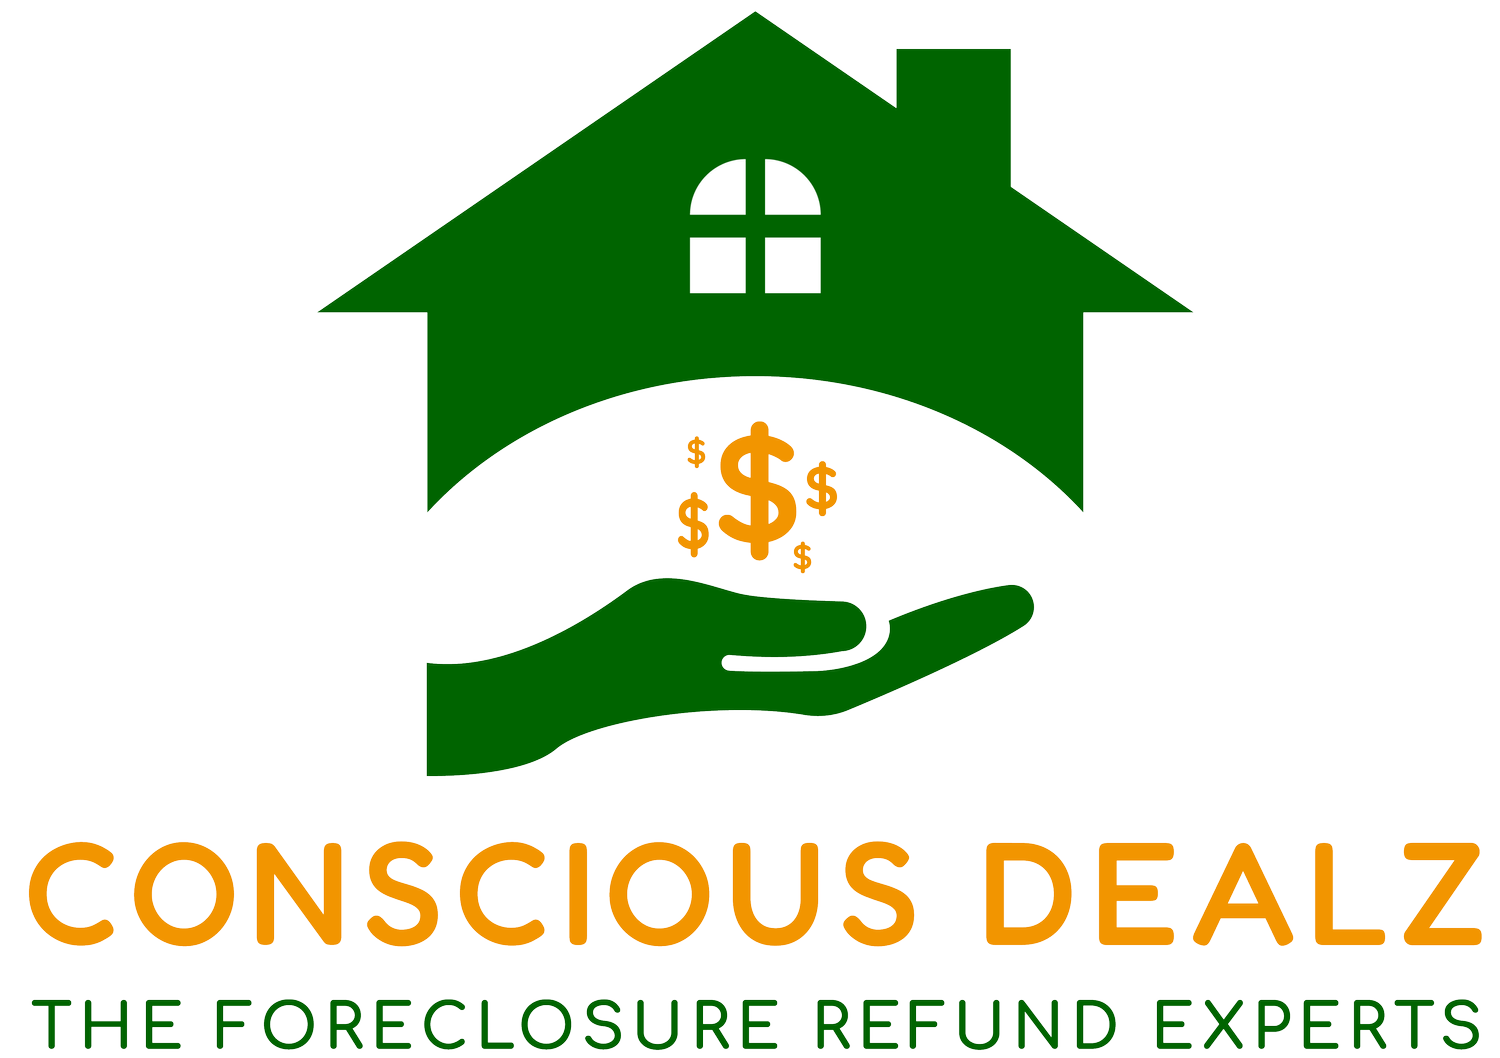 The Foreclosure Refund Experts